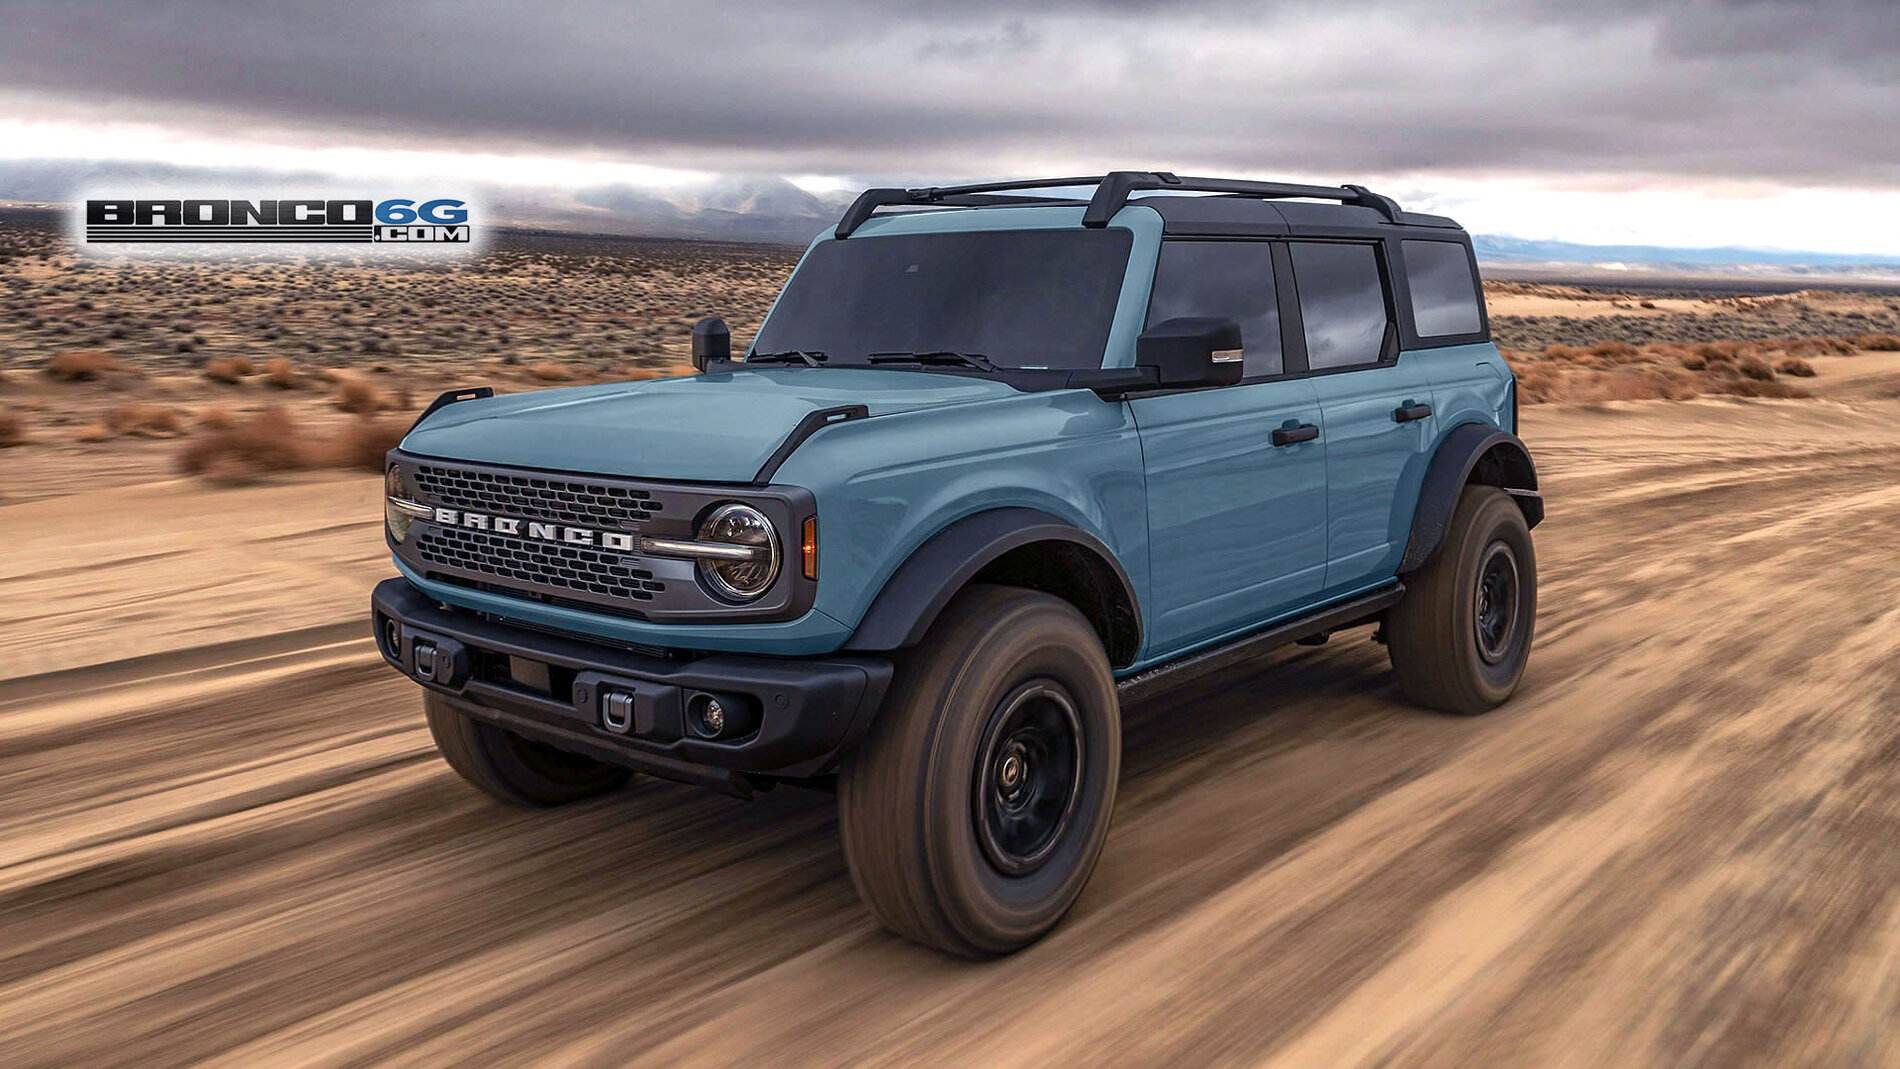 The 2021 Ford Bronco With Sasquatch Pack Gets Rendered In Several